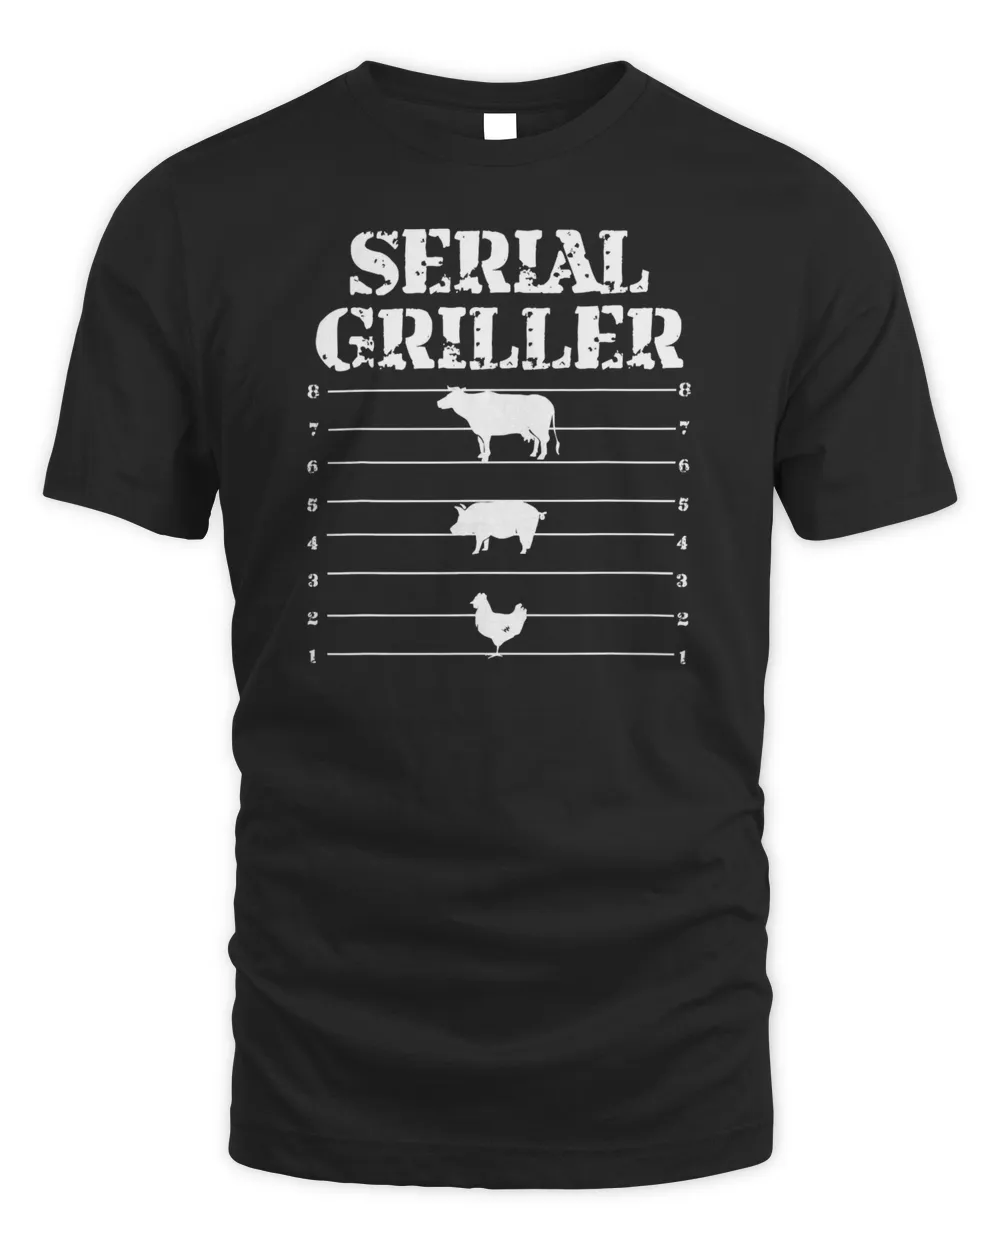 Serial Griller Funny Grilling Grill BBQ Master T-Shirt